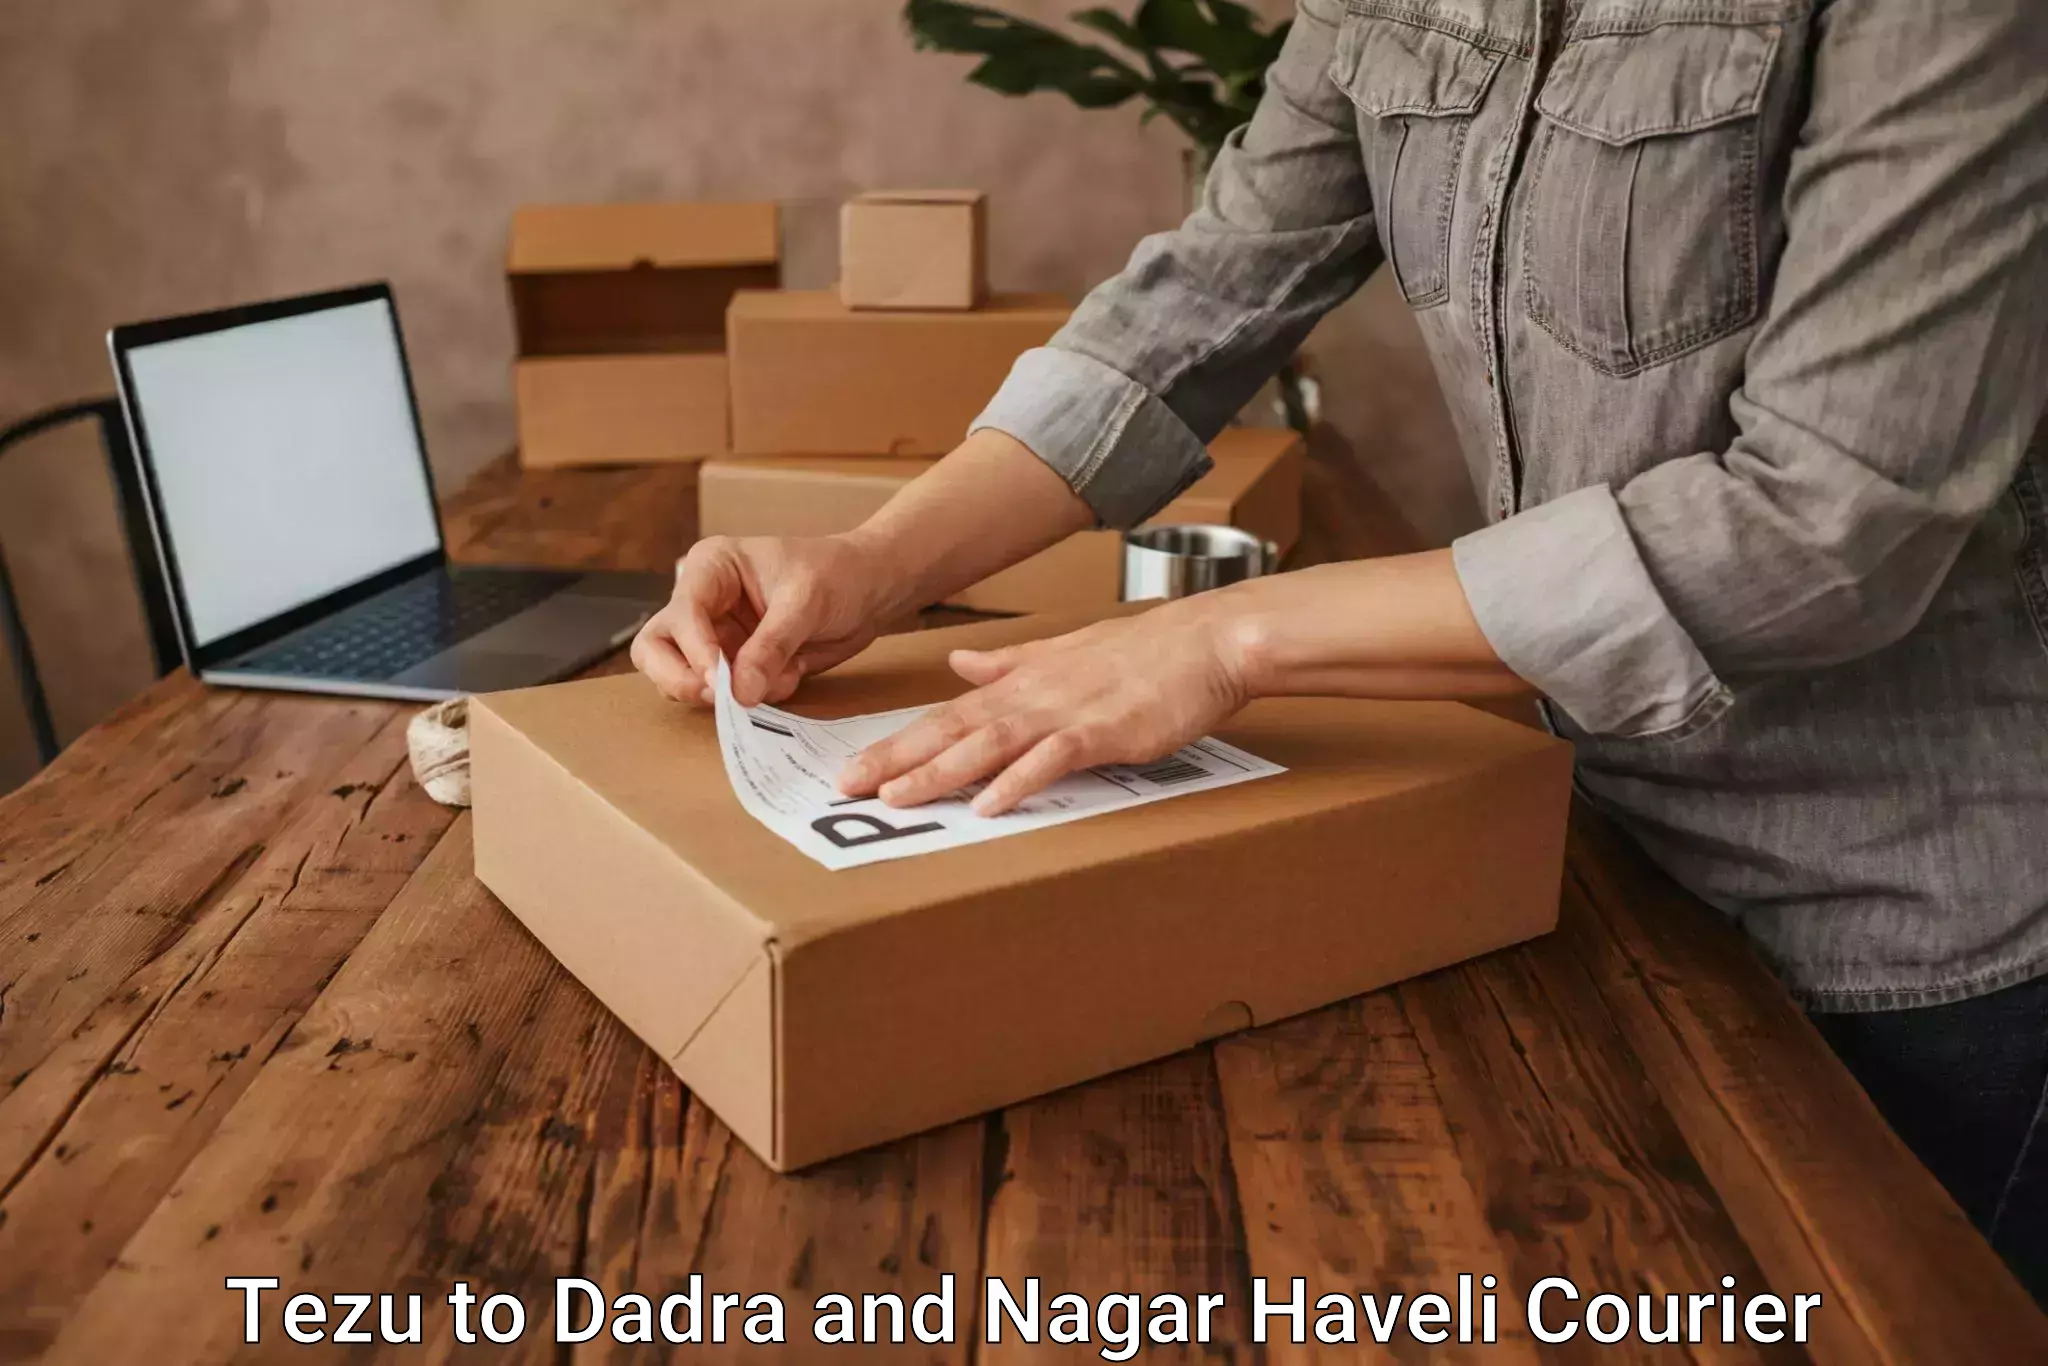 Emergency parcel delivery in Tezu to Dadra and Nagar Haveli